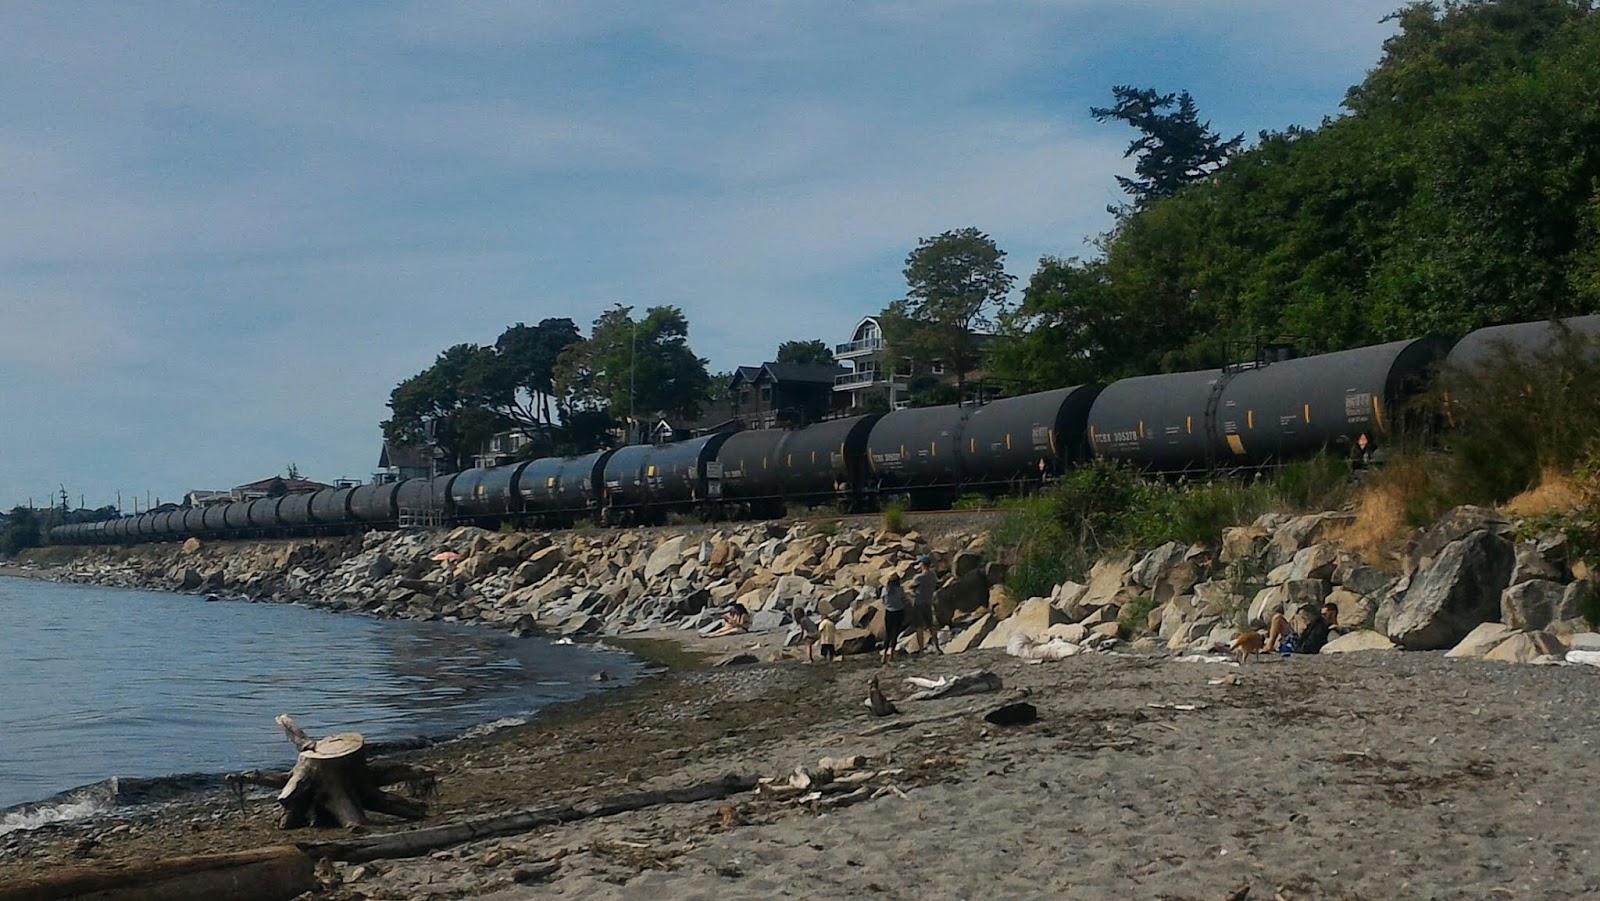 During Transfer to Washington Oil Spilled a Little